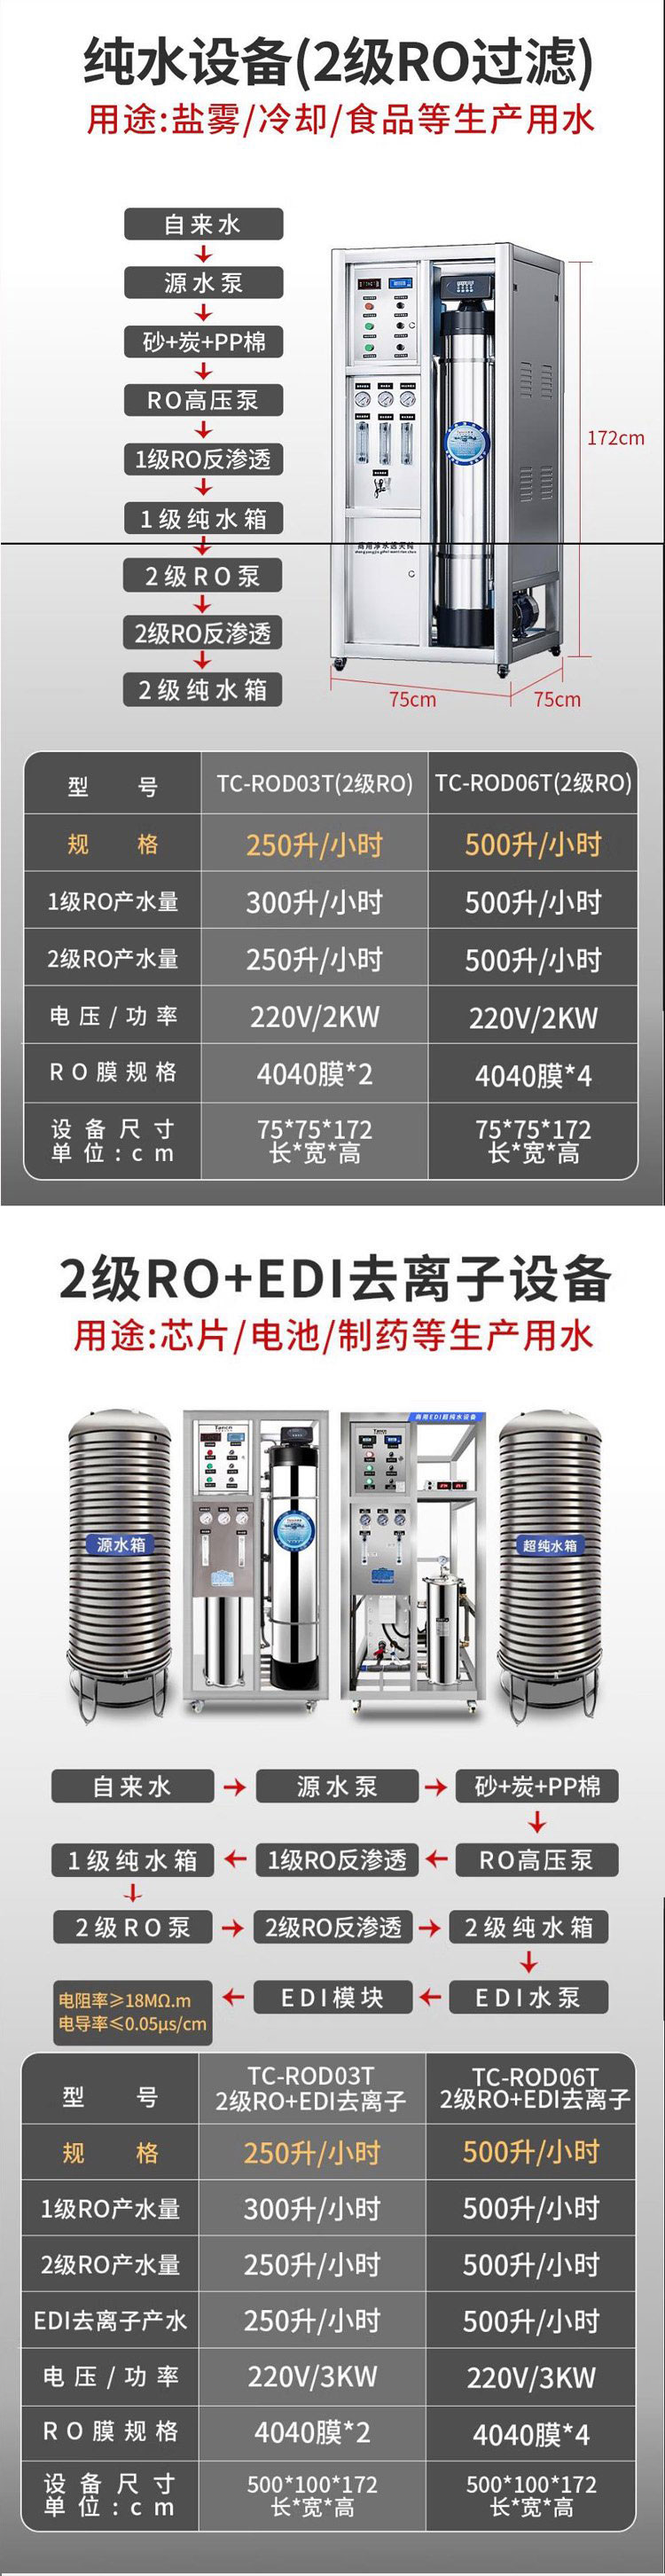 Large scale water treatment ultrafiltration system industrial deionization machine processing Tianpure RO reverse osmosis purified water equipment